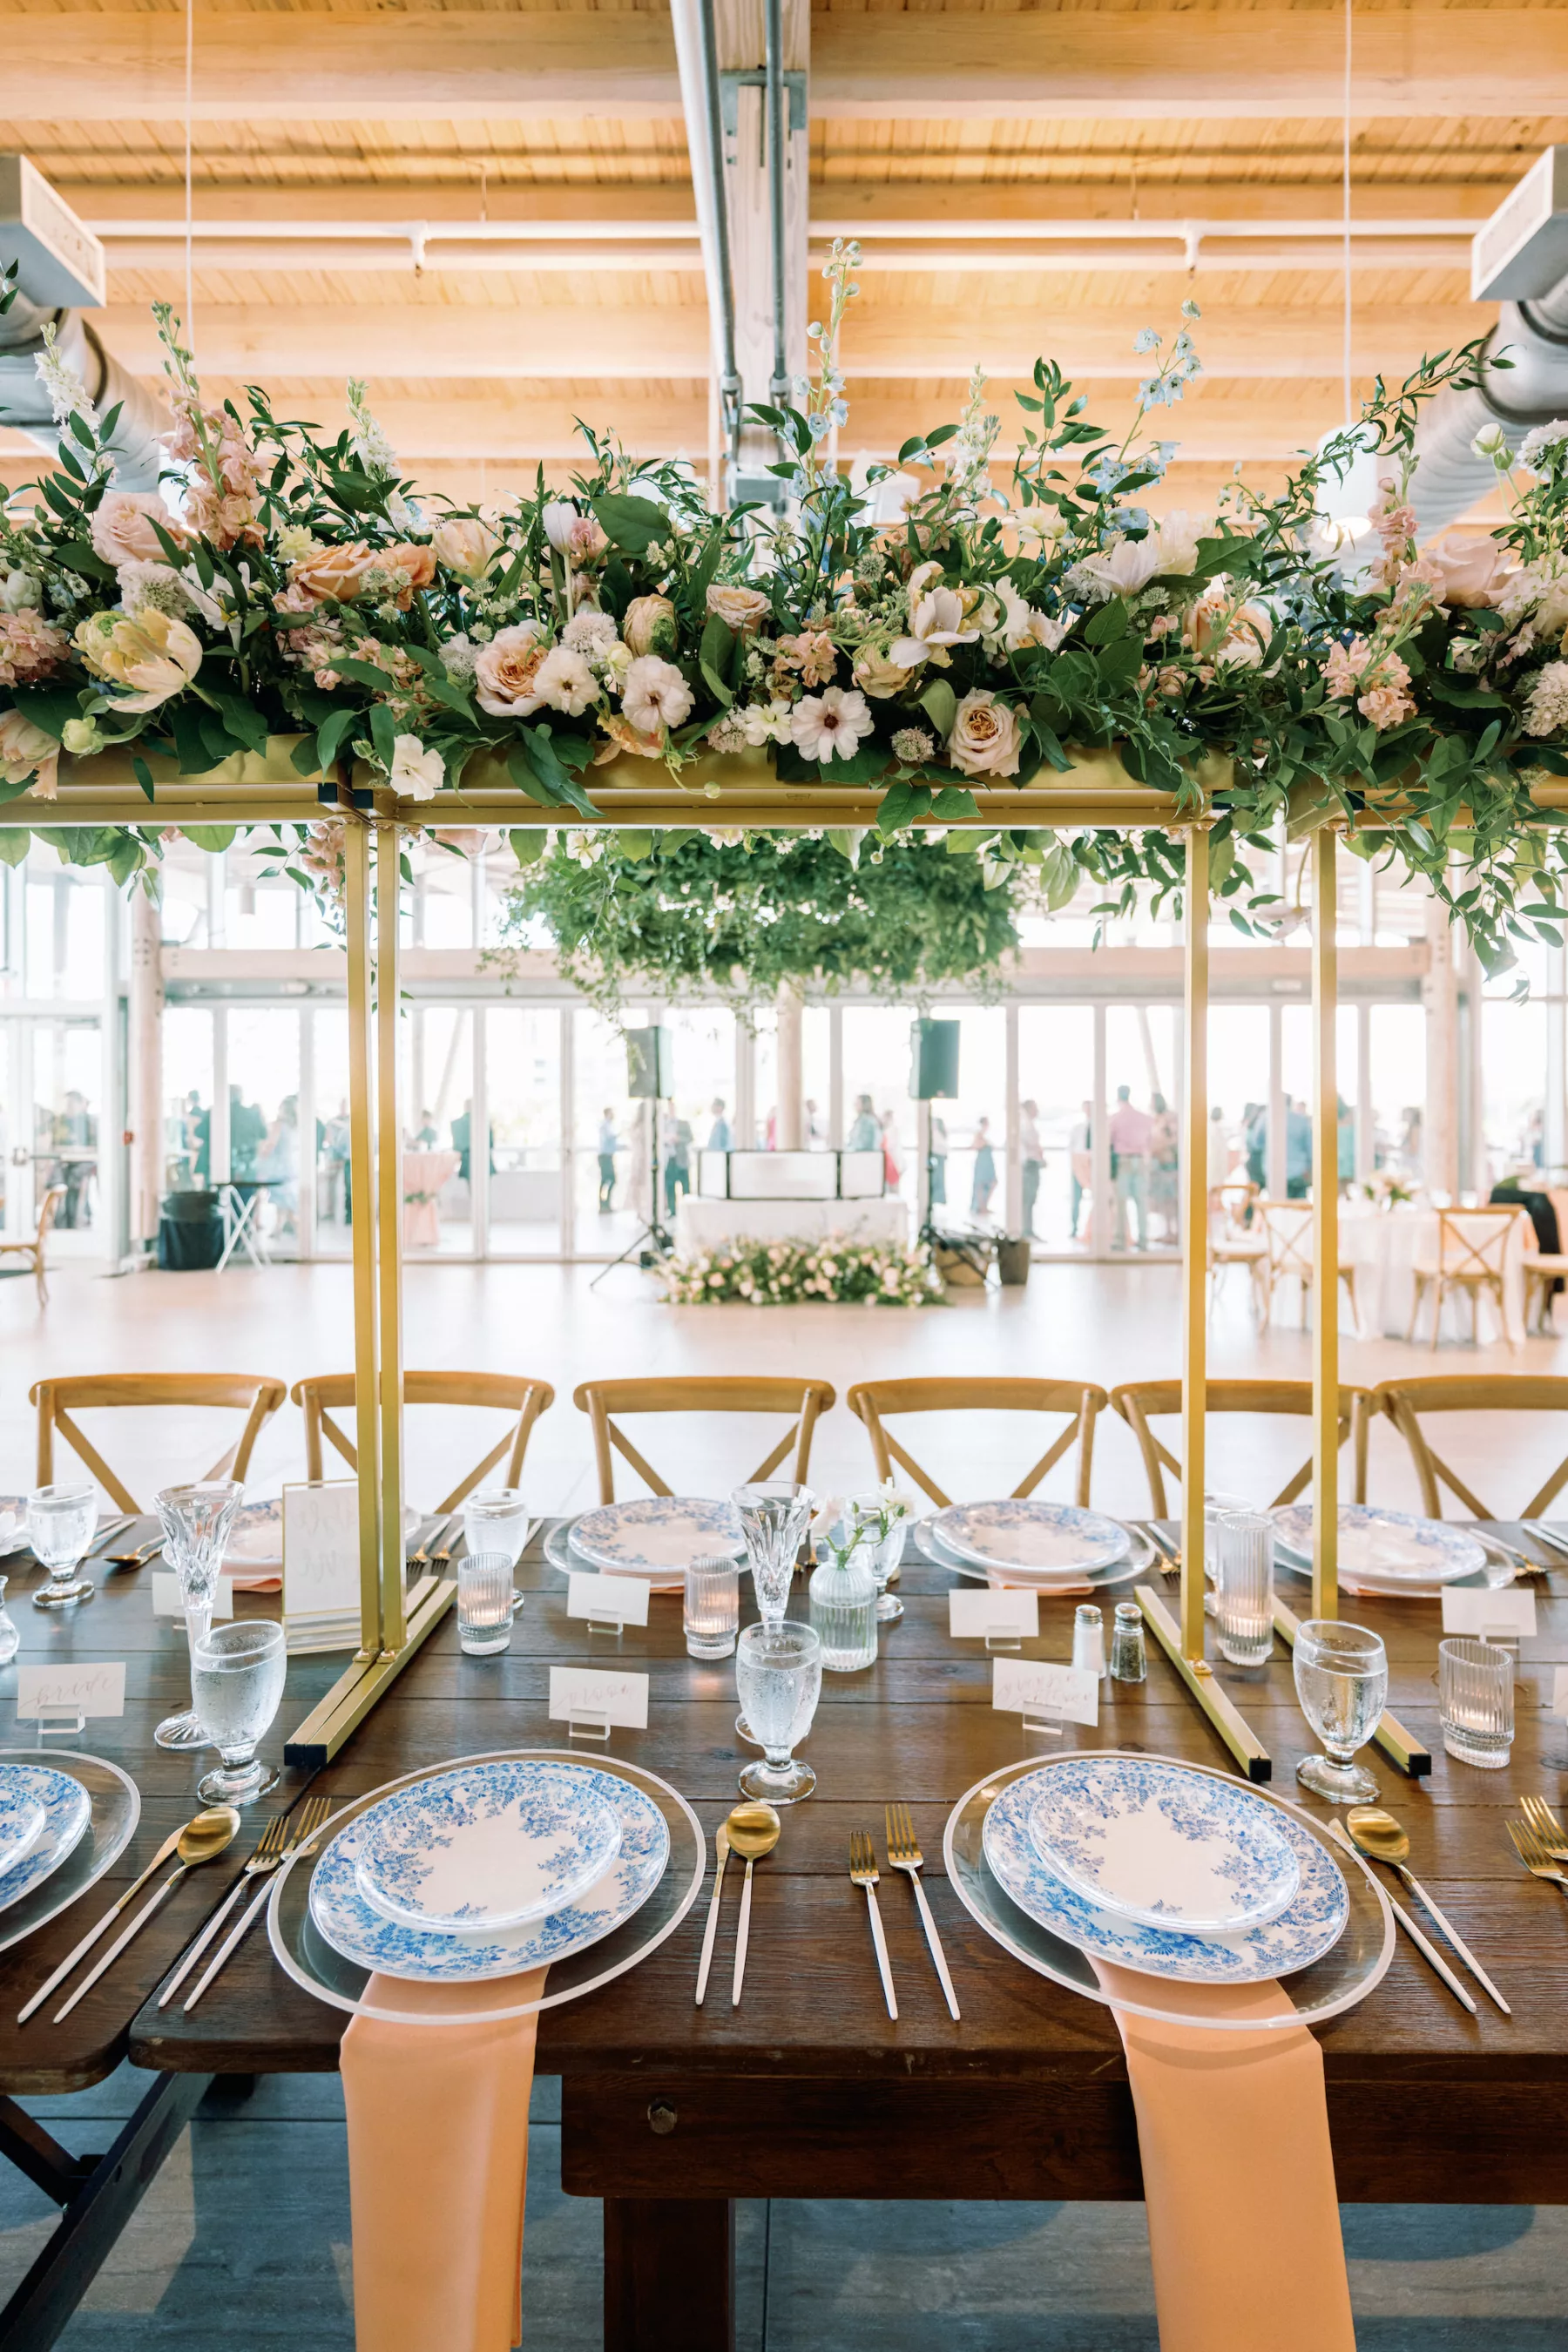 Romantic Pastel Pink and Blue Wedding Reception Tablescape Inspiration | Tall Gold Flower Stand Centerpiece Decor Ideas with White Anemone, Pink Roses, Stock Flowers, and Greenery | Tampa Bay Planner Wilder Mind Events | Venue Tampa River Center